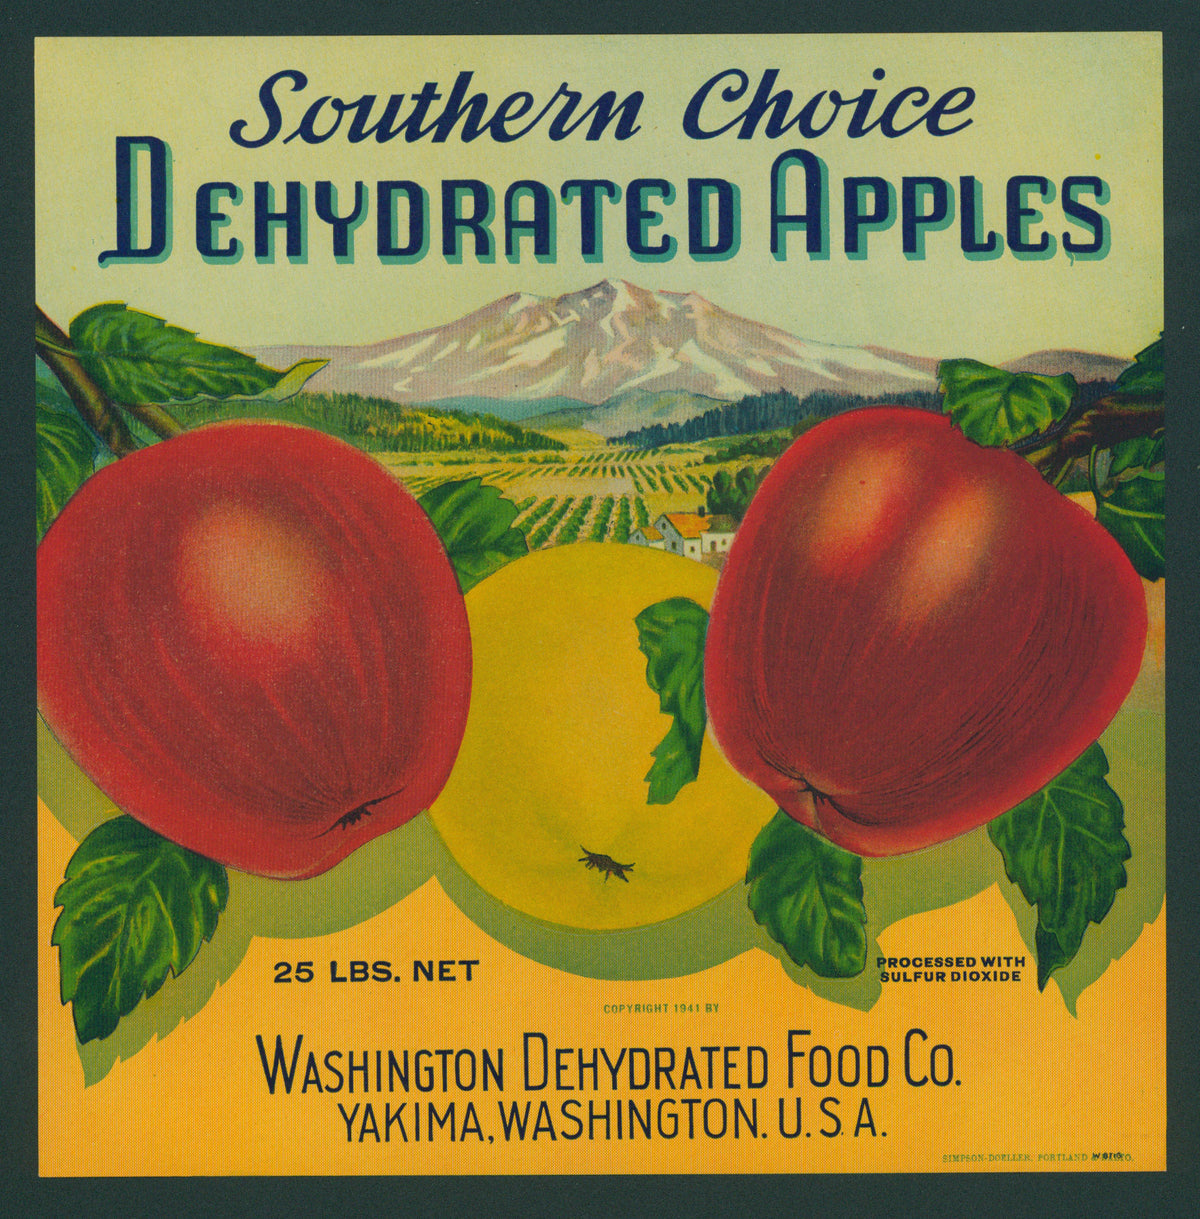 Southern Choice Dehydrated Apples- Crate Label - Authentic Vintage Antique Print